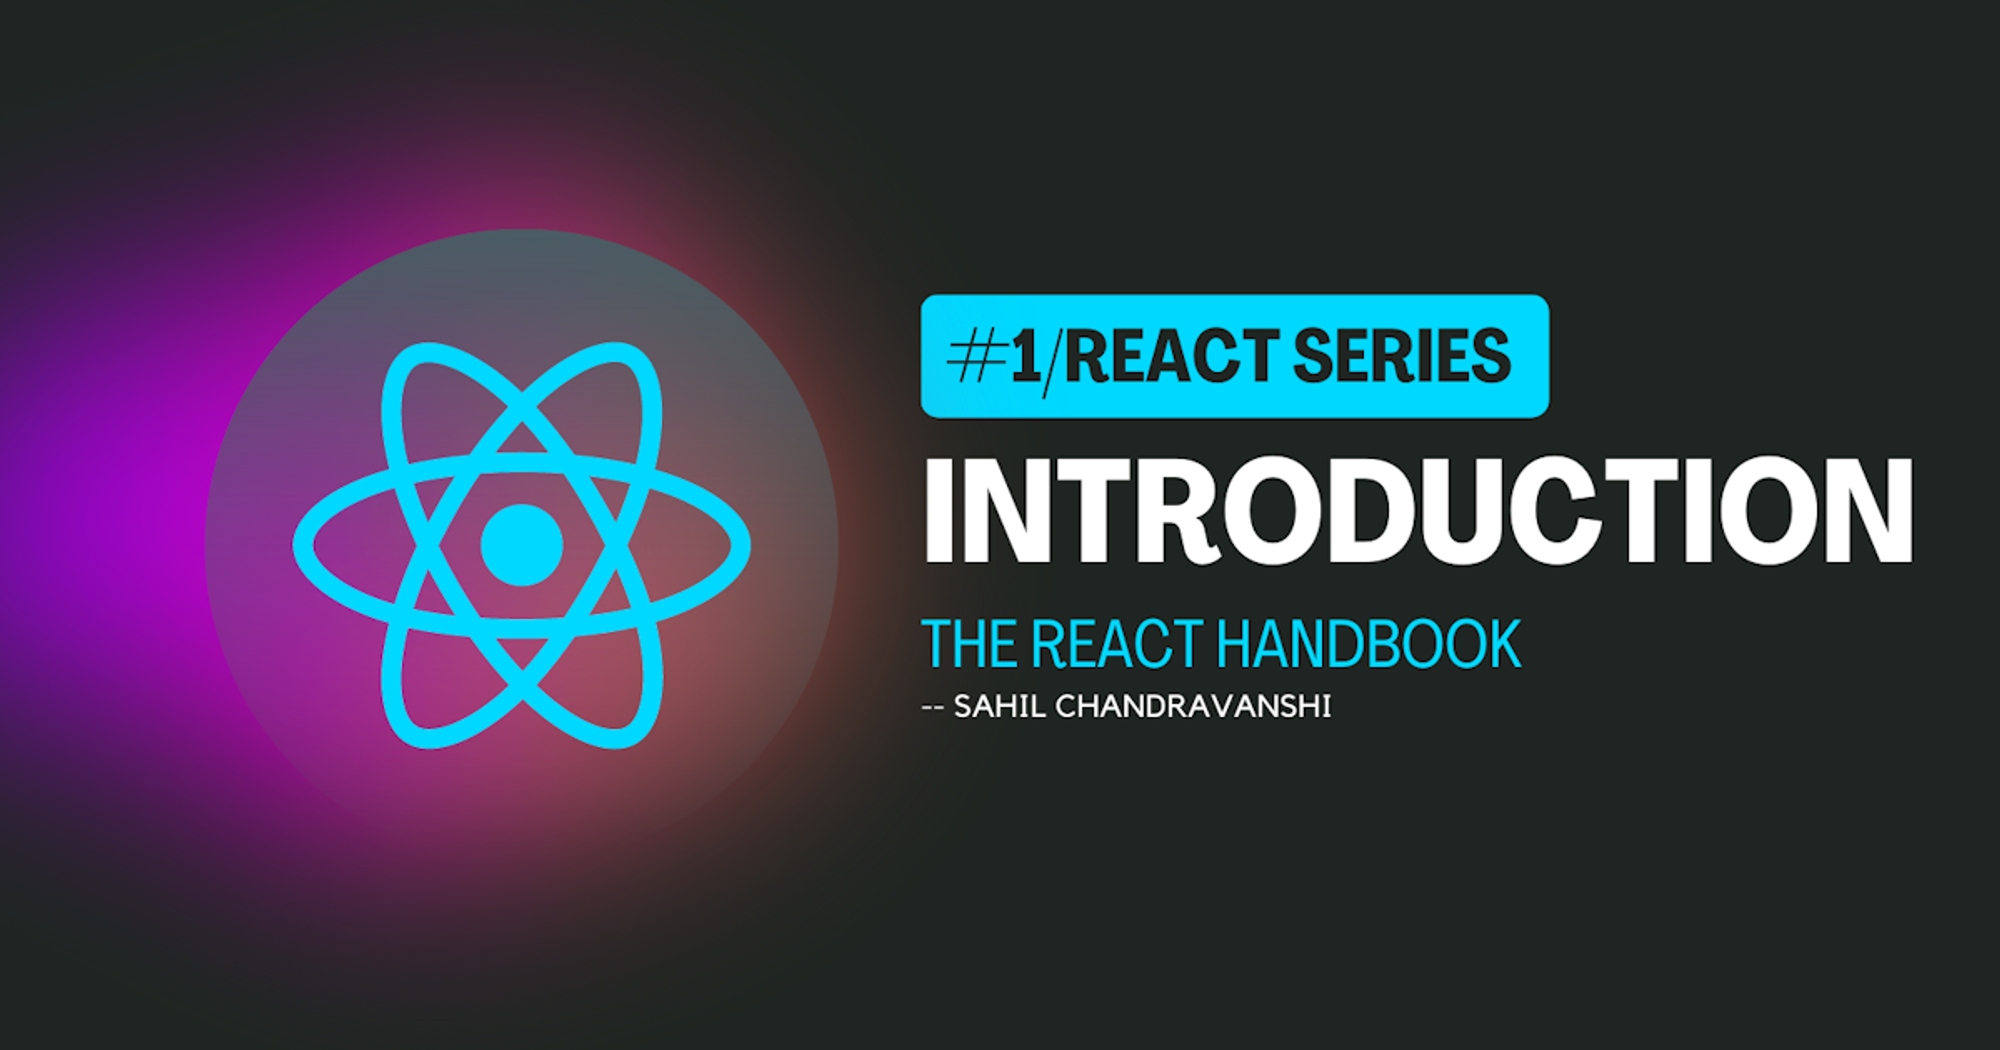 Introduction to ReactJS. The React Series